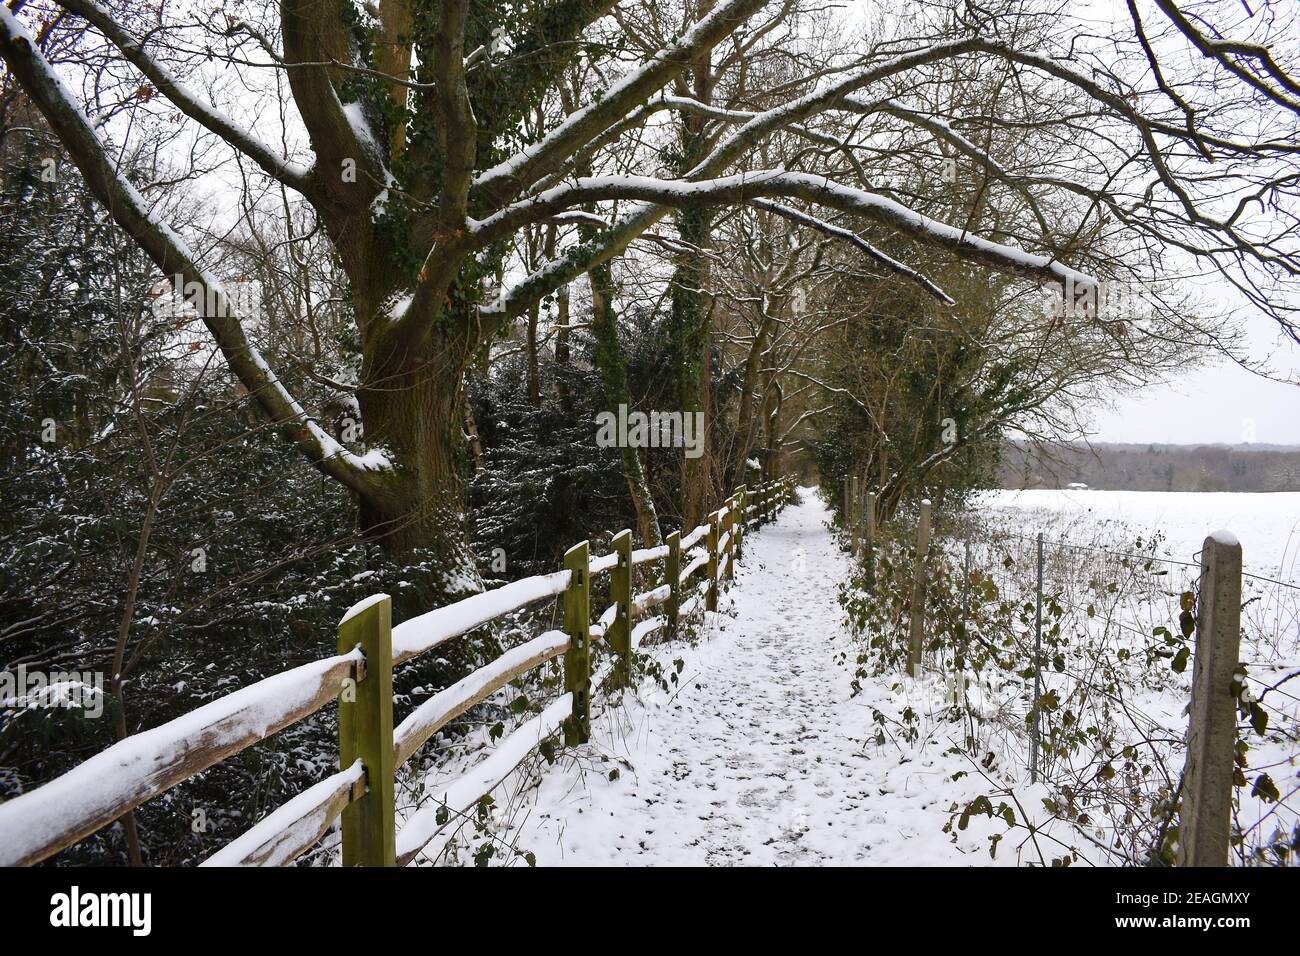 View looking down a path of the snow covered Worth Way near the village of Crawley Down in West Sussex, England, UK. Snowy footprints cover the path. Stock Photo